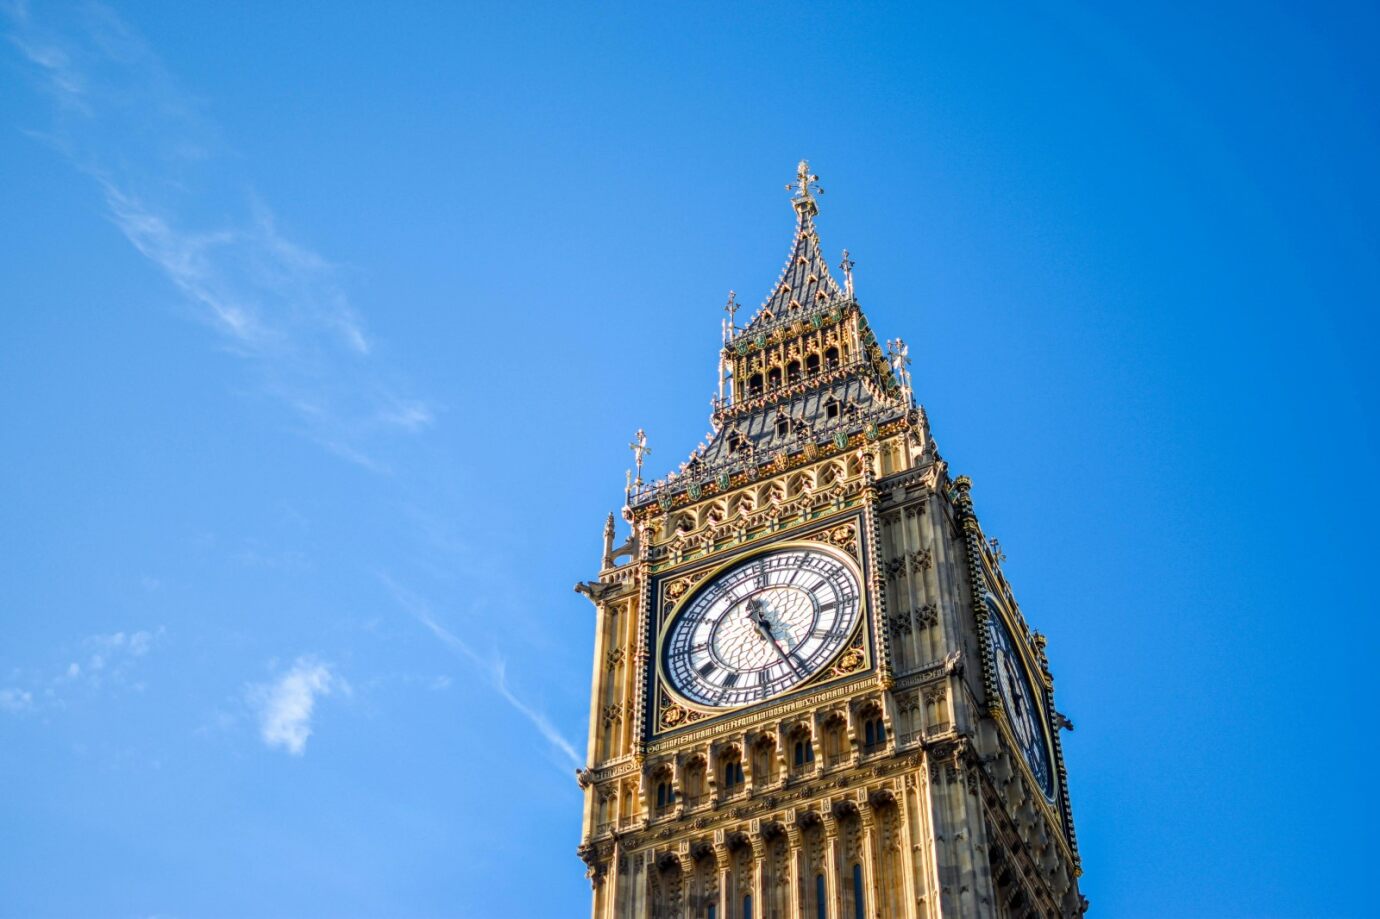 Image of Big Ben government and how to apply for a BRP check in the UK